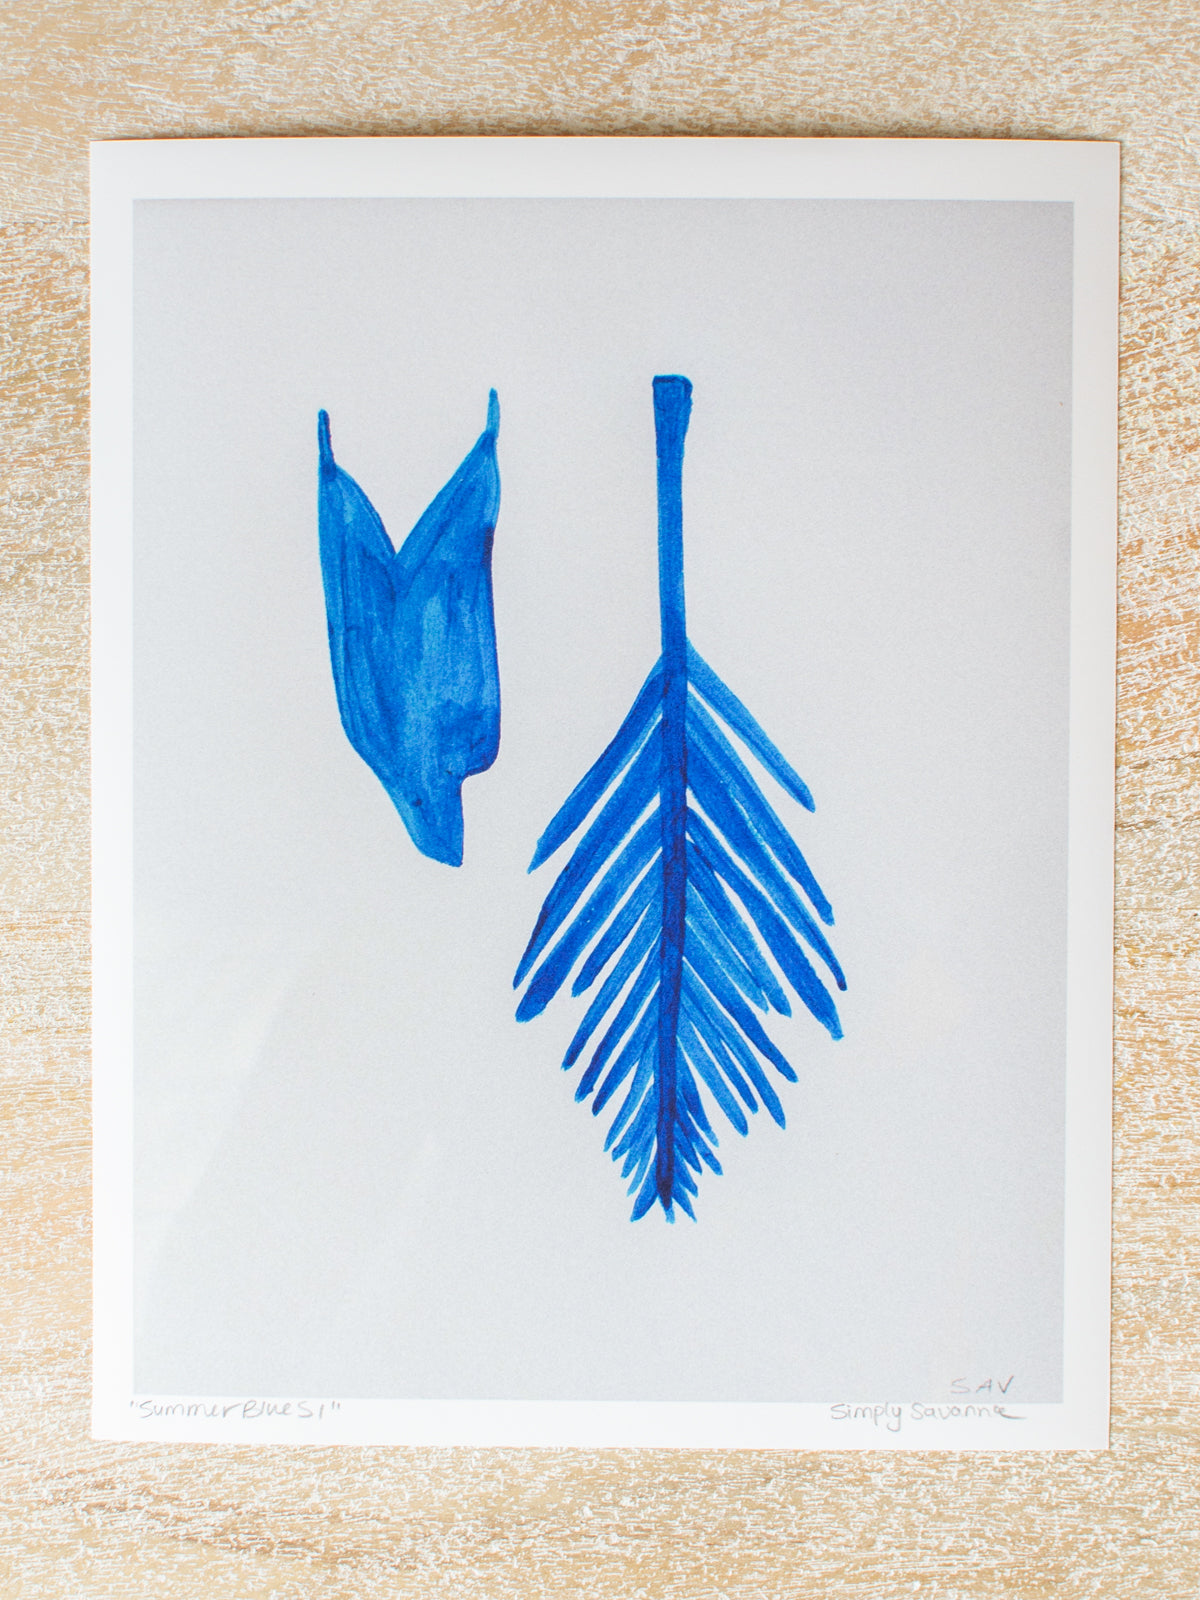 "Summer Blues I" Signed Print by Simply Savanna